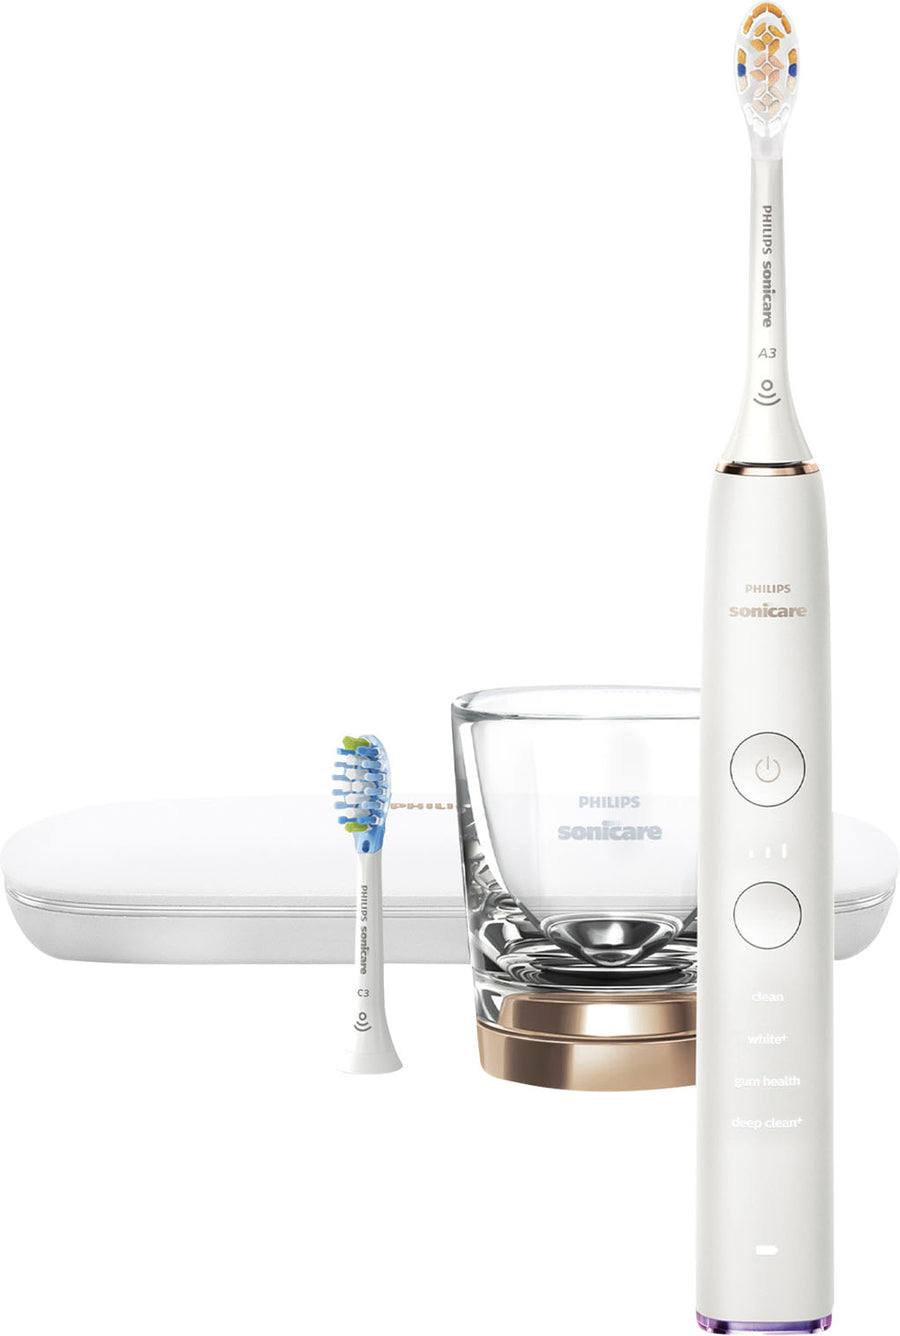 Philips Sonicare DiamondClean Smart Electric, Rechargeable Toothbrush for Complete Oral Care  - 9300 Series - Rose Gold_0